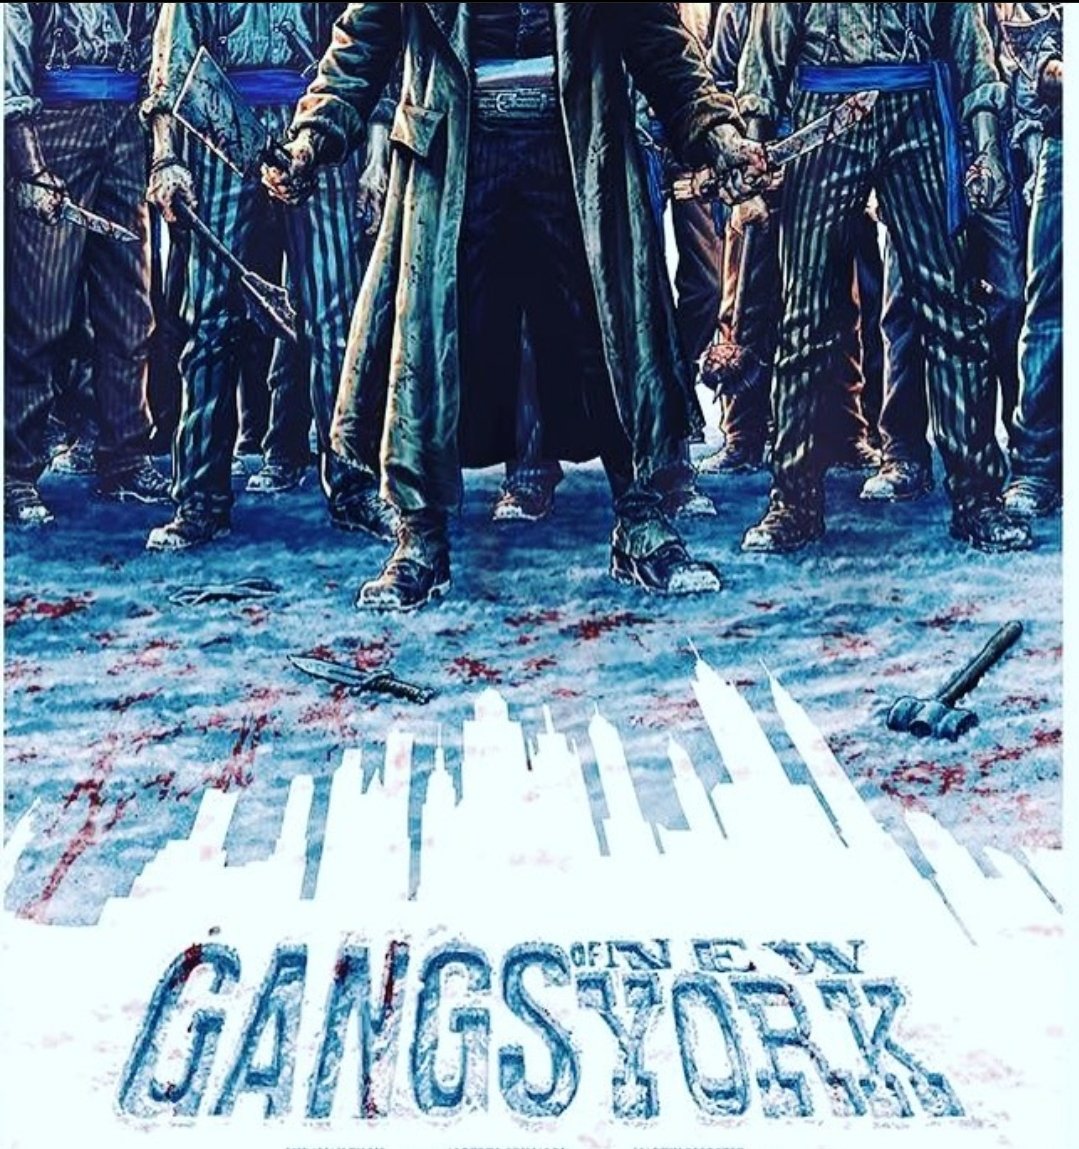 Our epic episode of -Gangs of New
York- hosted by Ron drops next Monday January 9th
#barrelagedficks #PodcastAndChill #podcasts #whitebataudio
#moviereview #beer #drunkpodcast #moviefacts #podcastlife
#art #subscribe #horror #liqour #podcastlovers #comedy